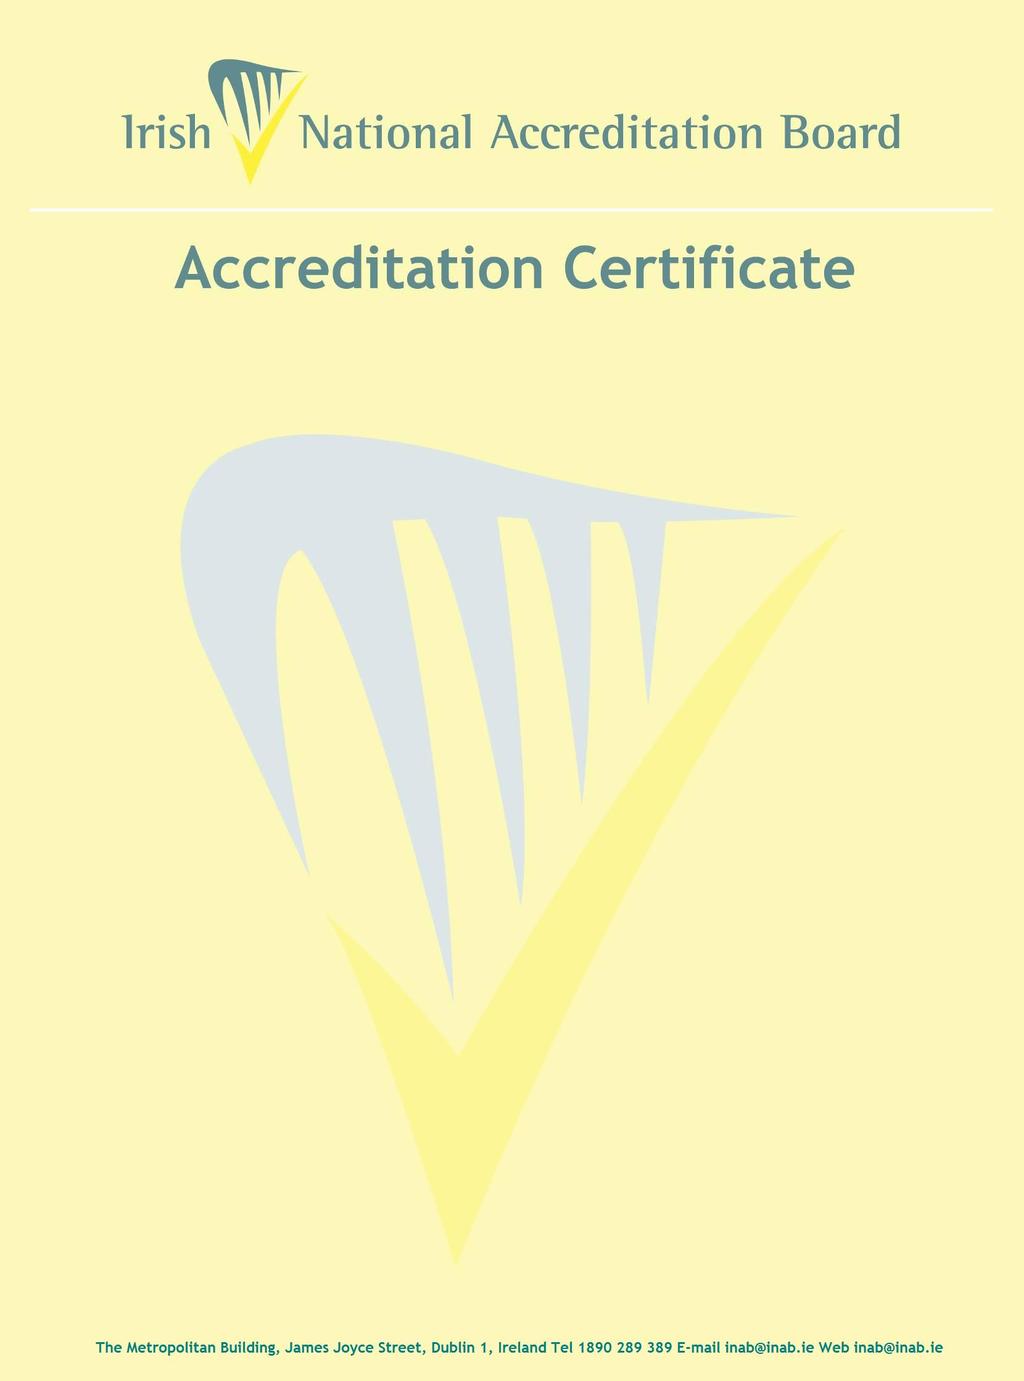 Saolta University Health Care Group Galway University Hospital Medical Microbiology Dept, University Hospital Galway, Newcastle Road, Galway Testing Laboratory Registration number: 097T is accredited